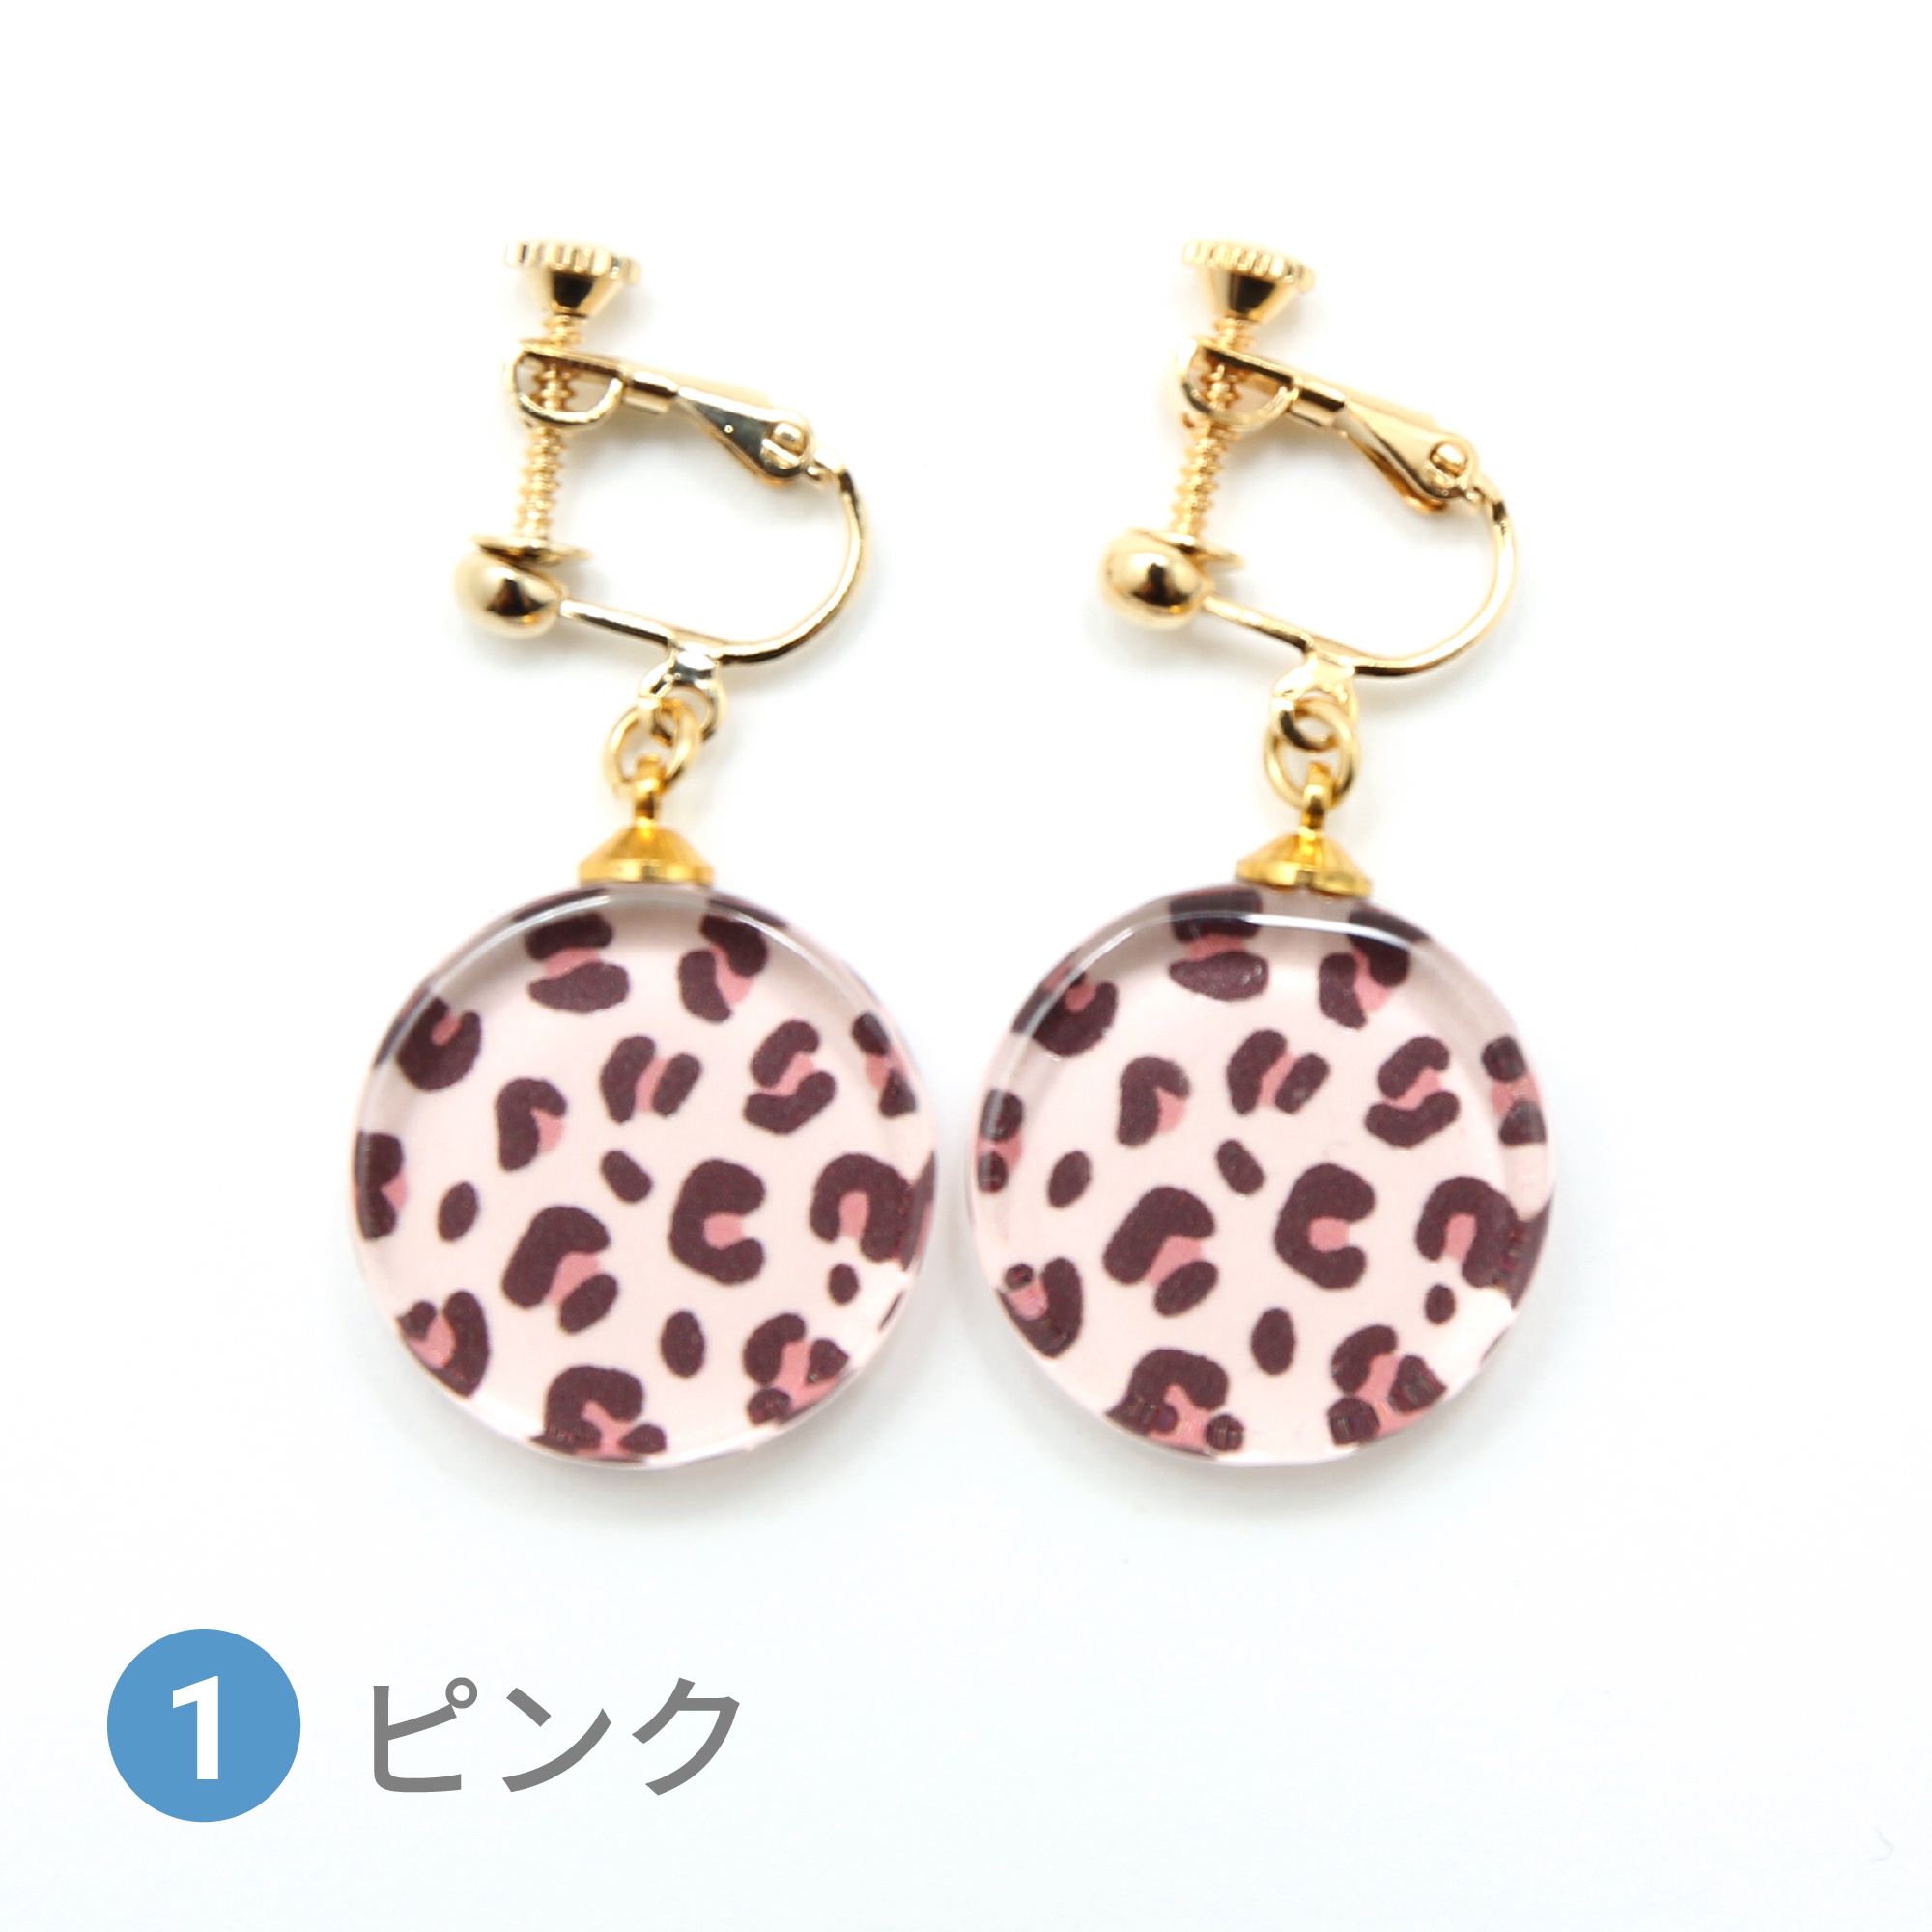 Glass accessories Earring LEOPARD pink round shape